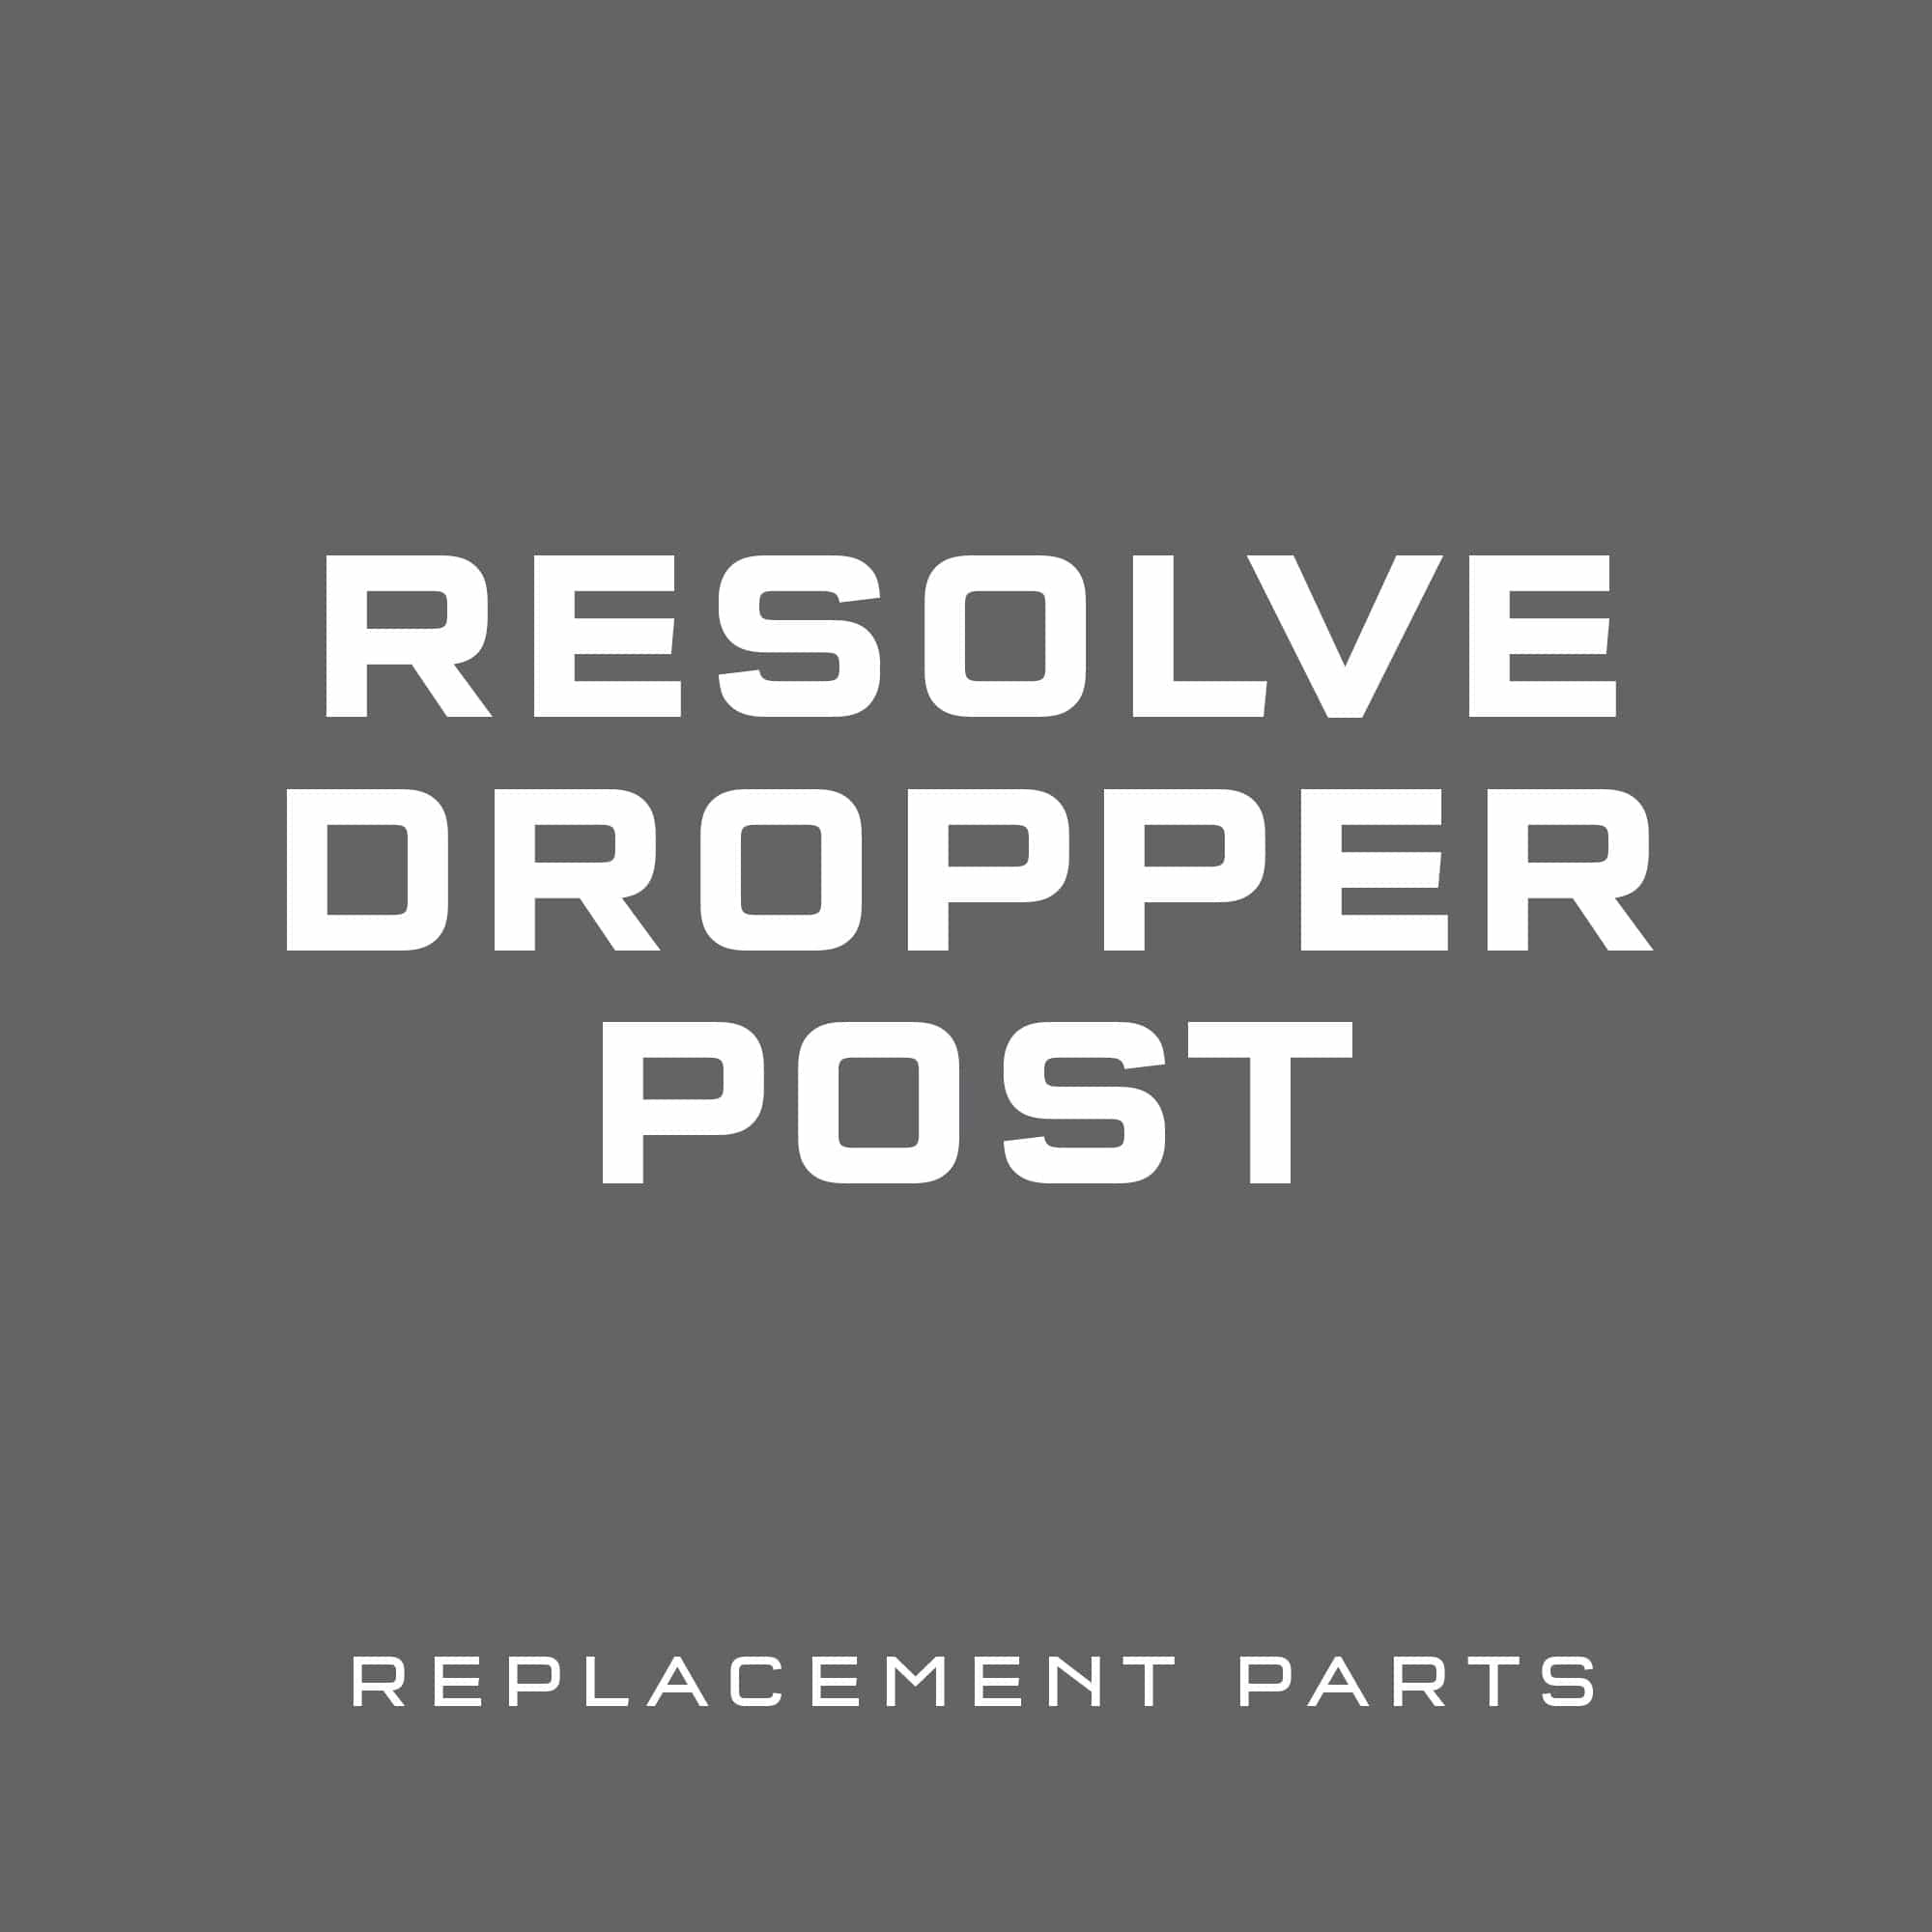 Resolve Dropper Post Replacement Parts